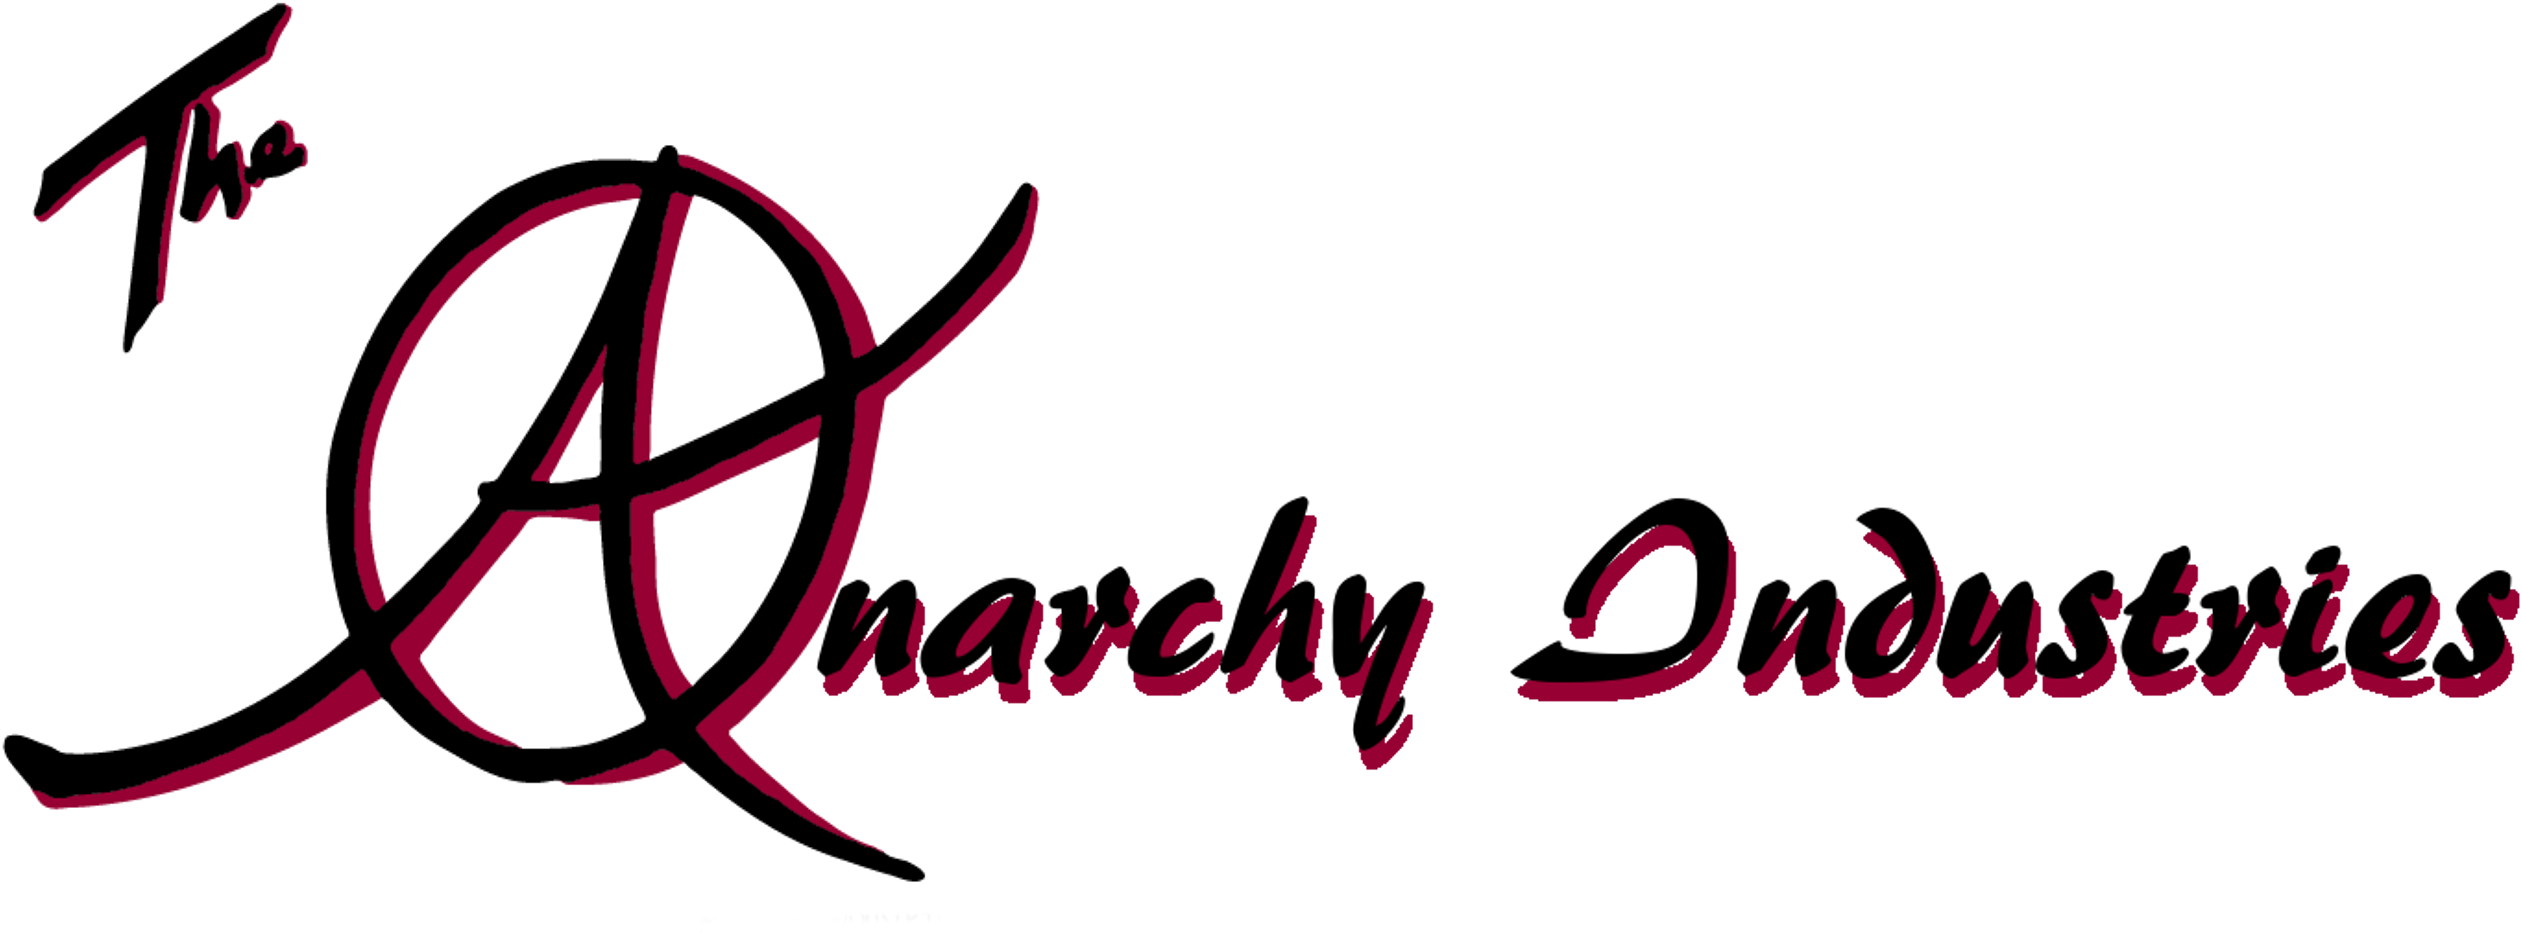 A Black And Pink Logo